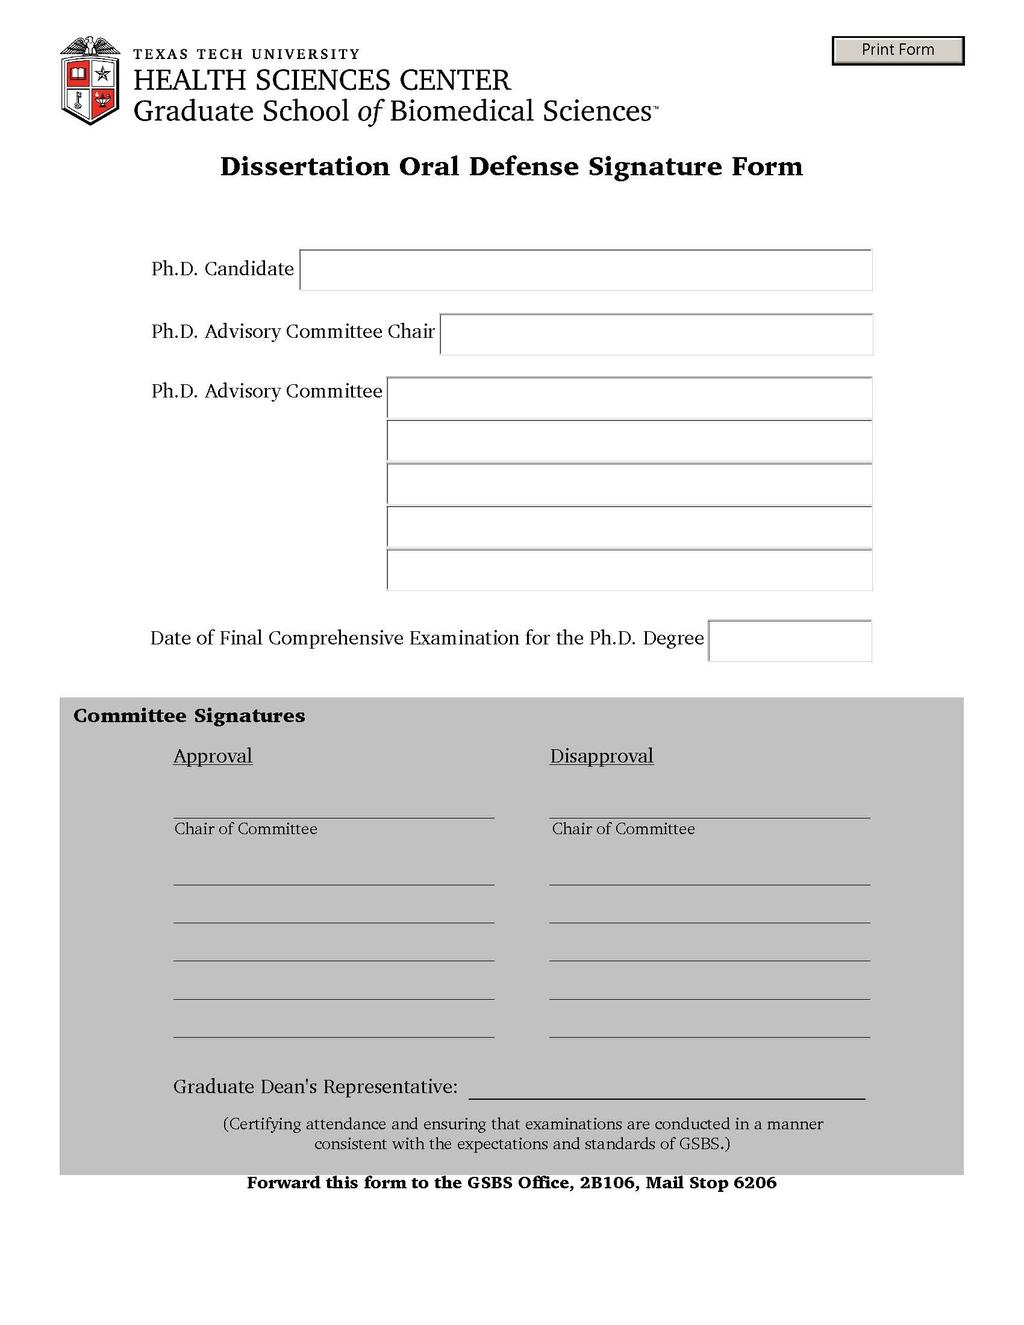 DISSERTATION ORAL DEFENSE Signature Form (MUST BE COMPLETED ON-LINE AT: http://www.ttuhsc.